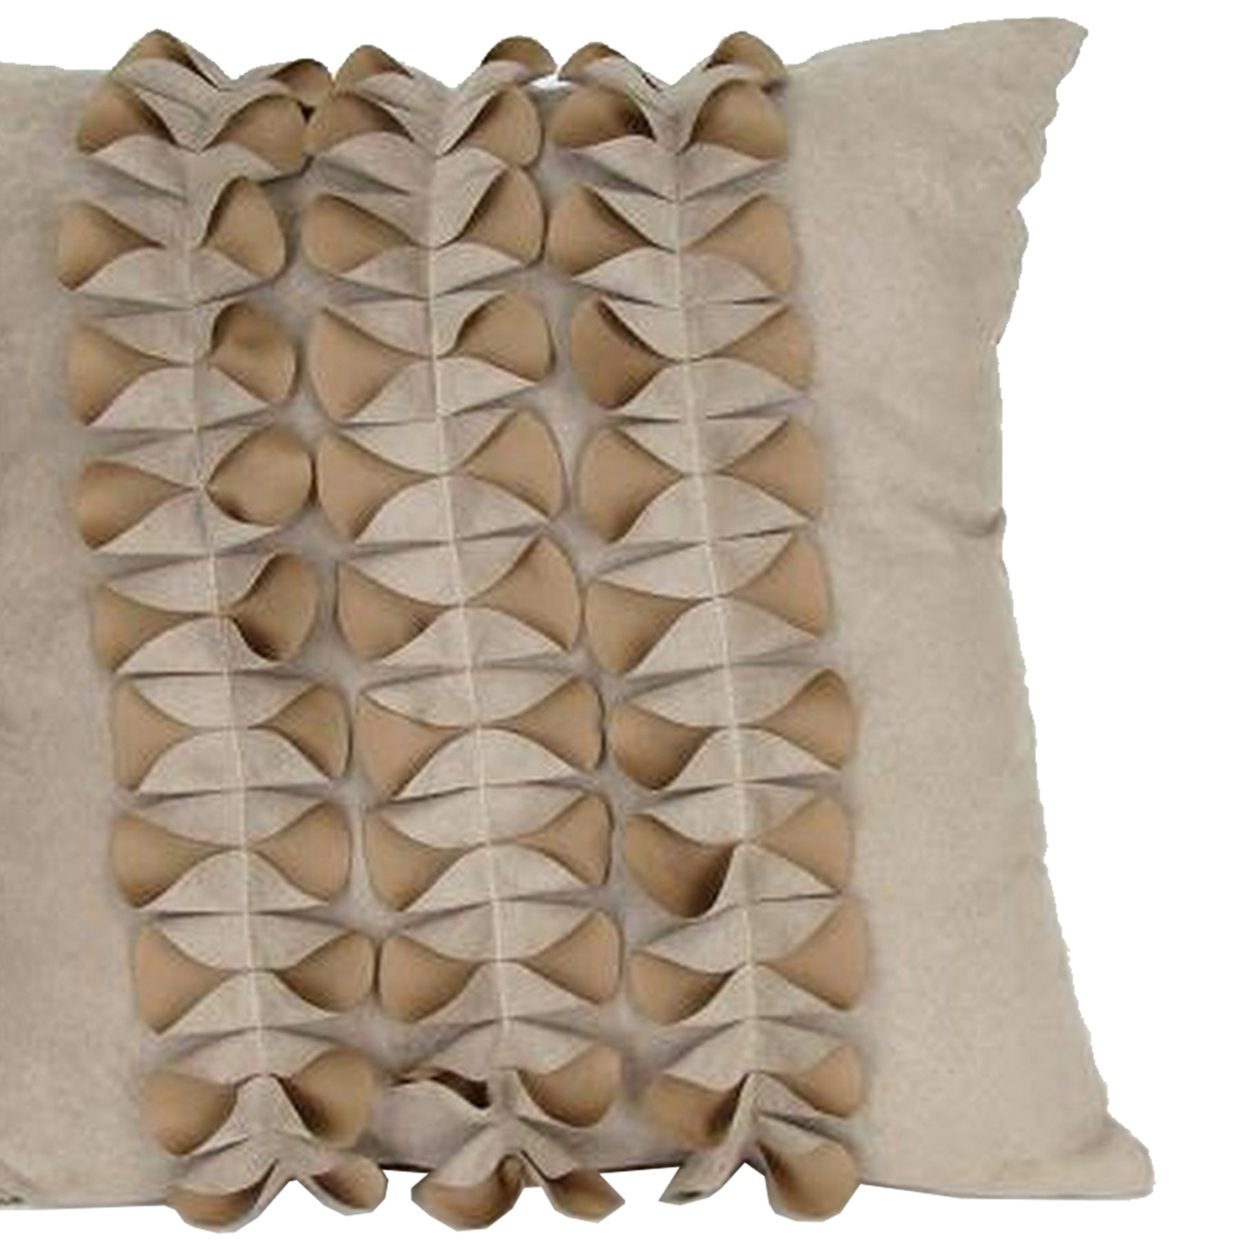 Fabric Accent Pillow With Pleated Bow Design, Beige- Saltoro Sherpi